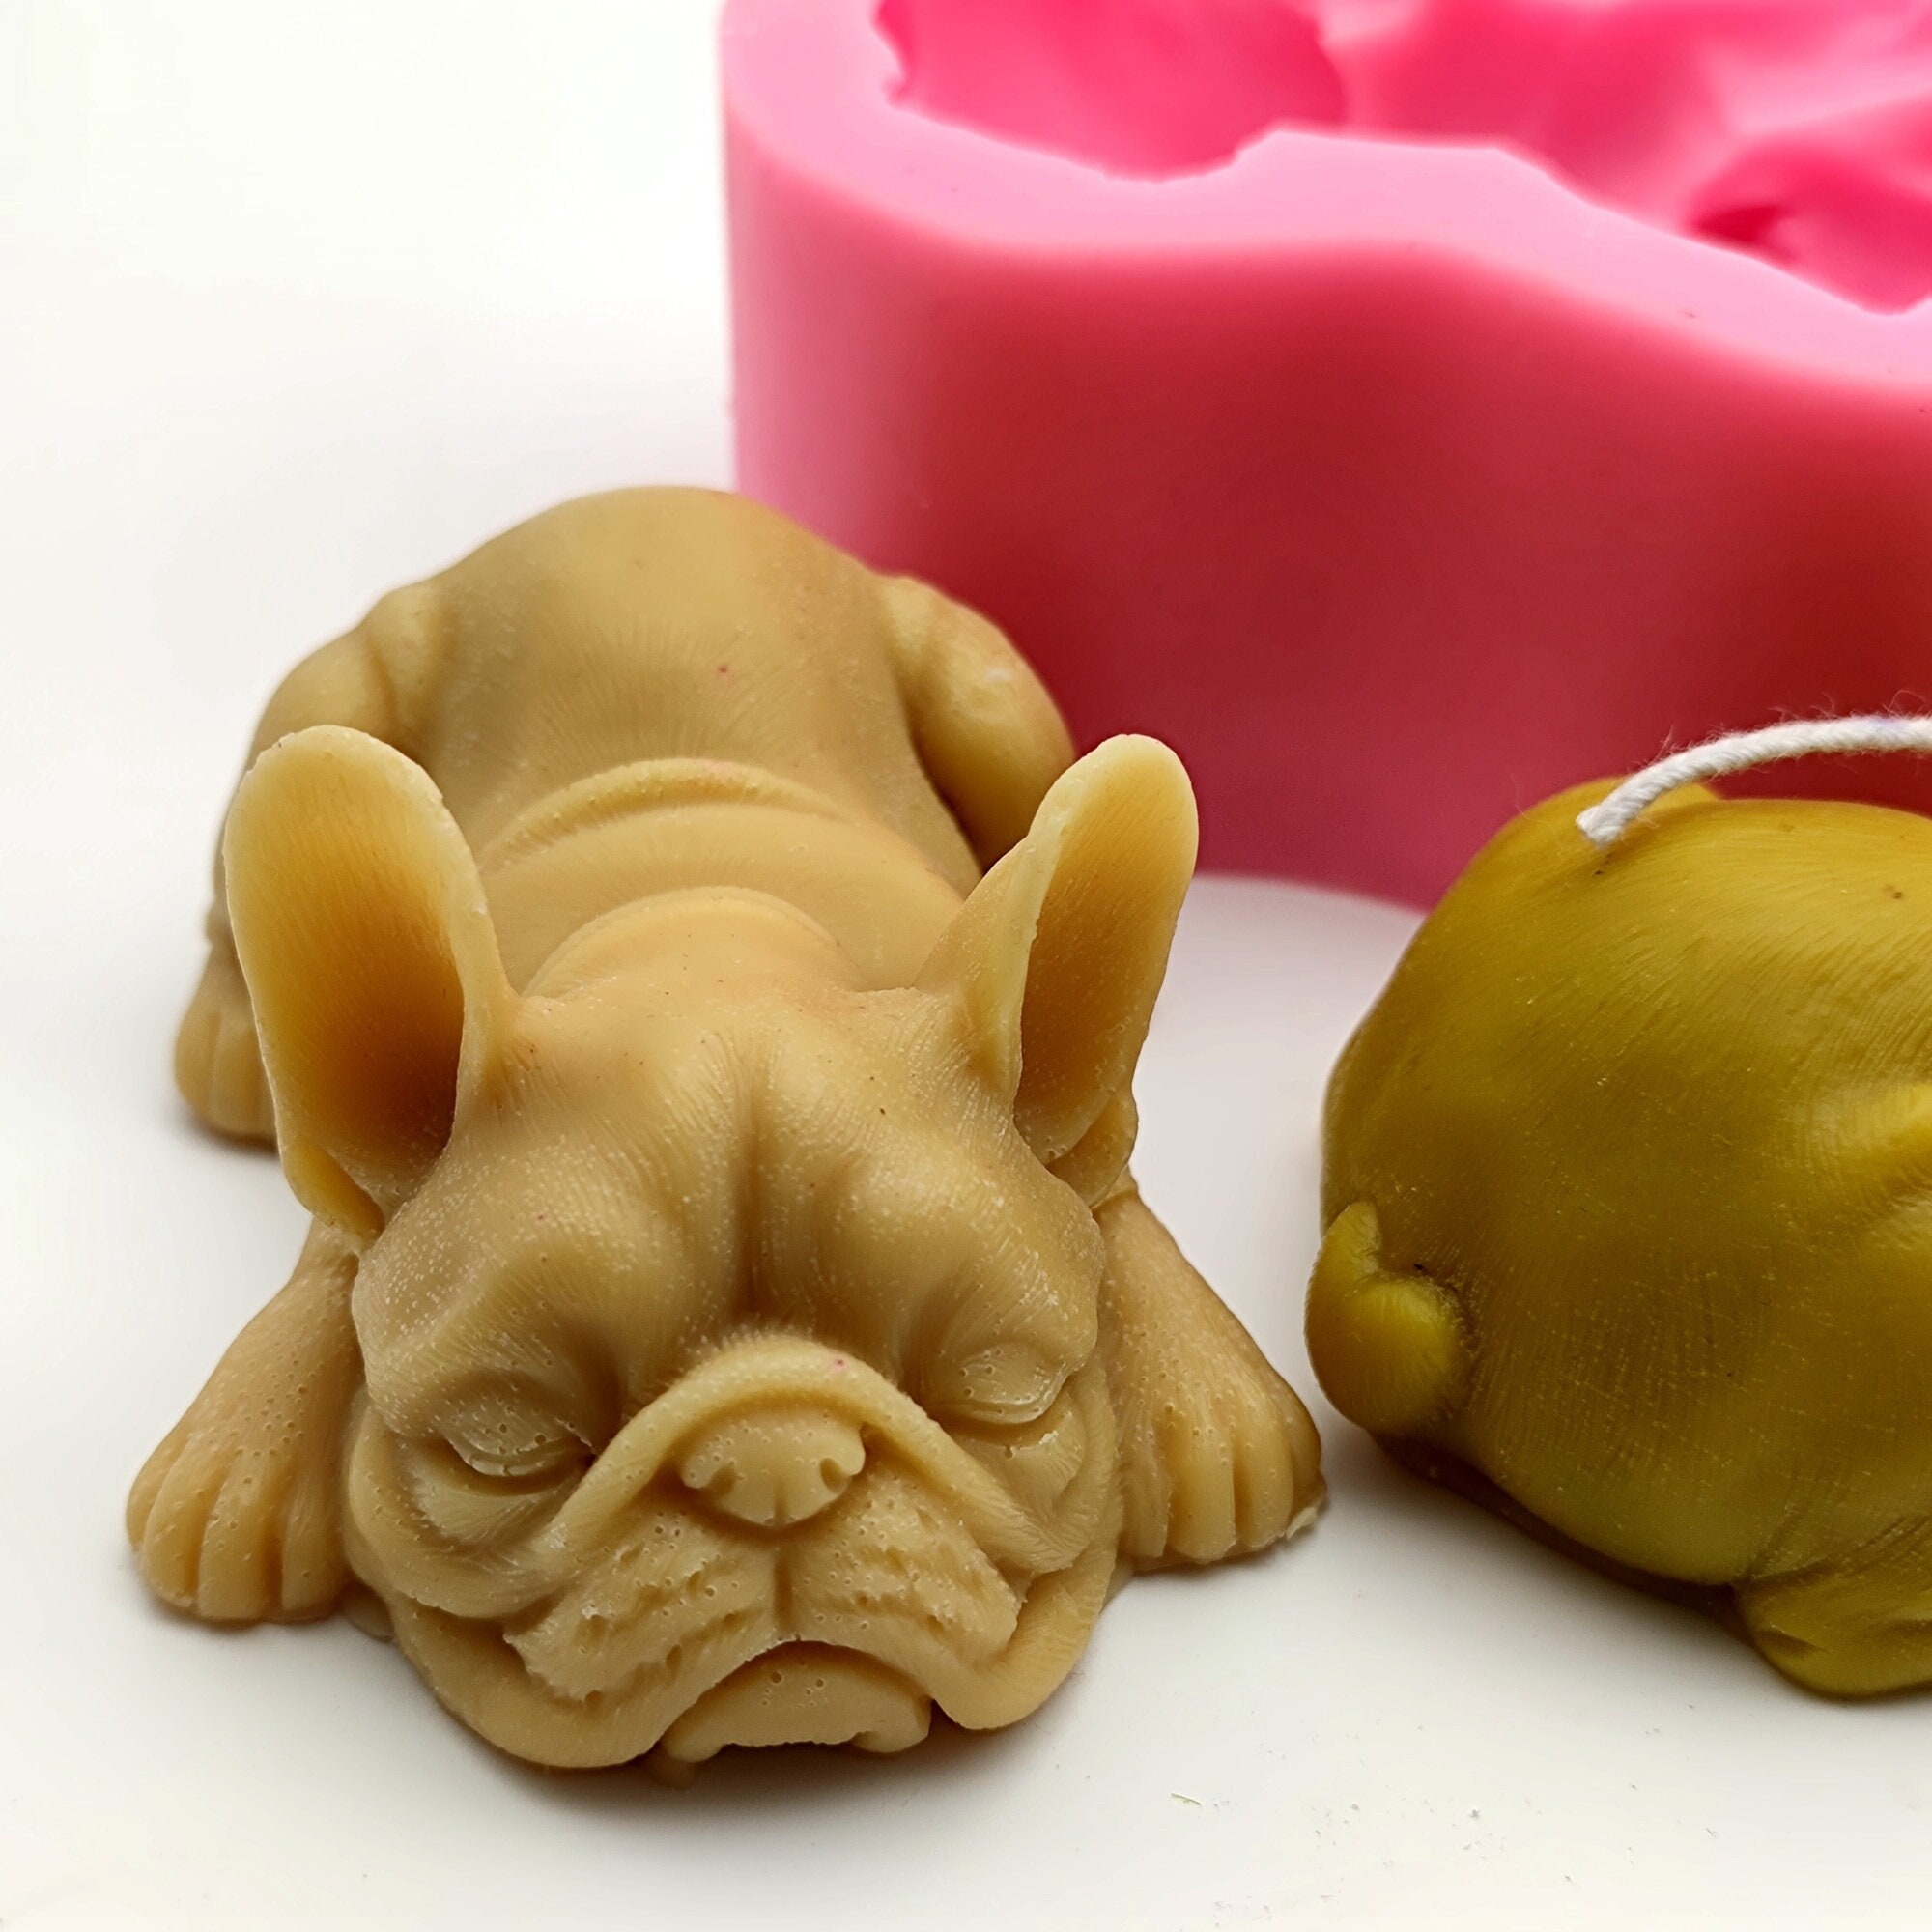 2 American Bull Dog Silicone Mold – The Crafts and Glitter Shop